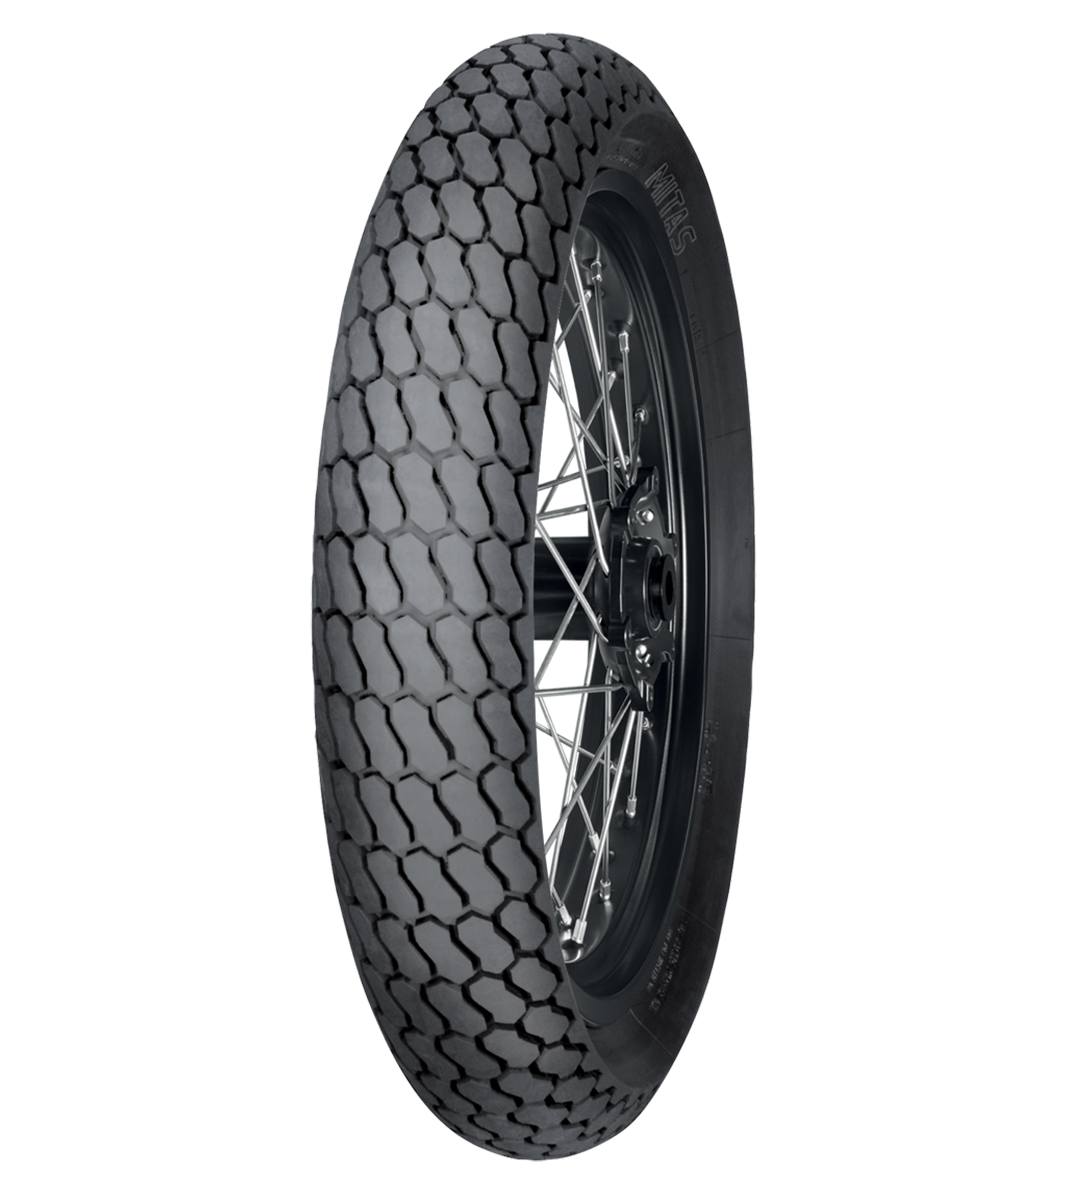 Mitas H-18 FLAT TRACK 140/80-19 (27.5x7.5-19) Flat Track Off-Road NHS 2 Green Tube Rear Tire, 223432, 140/80-19, Flat Track, H-18 Flat Track, Off-Road, Rear, Tires - Imported and distributed in North & South America by Lindeco Genuine Powersports - Premier Powersports Equipment and Accessories for Motorcycle Enthusiasts, Professional Riders and Dealers.